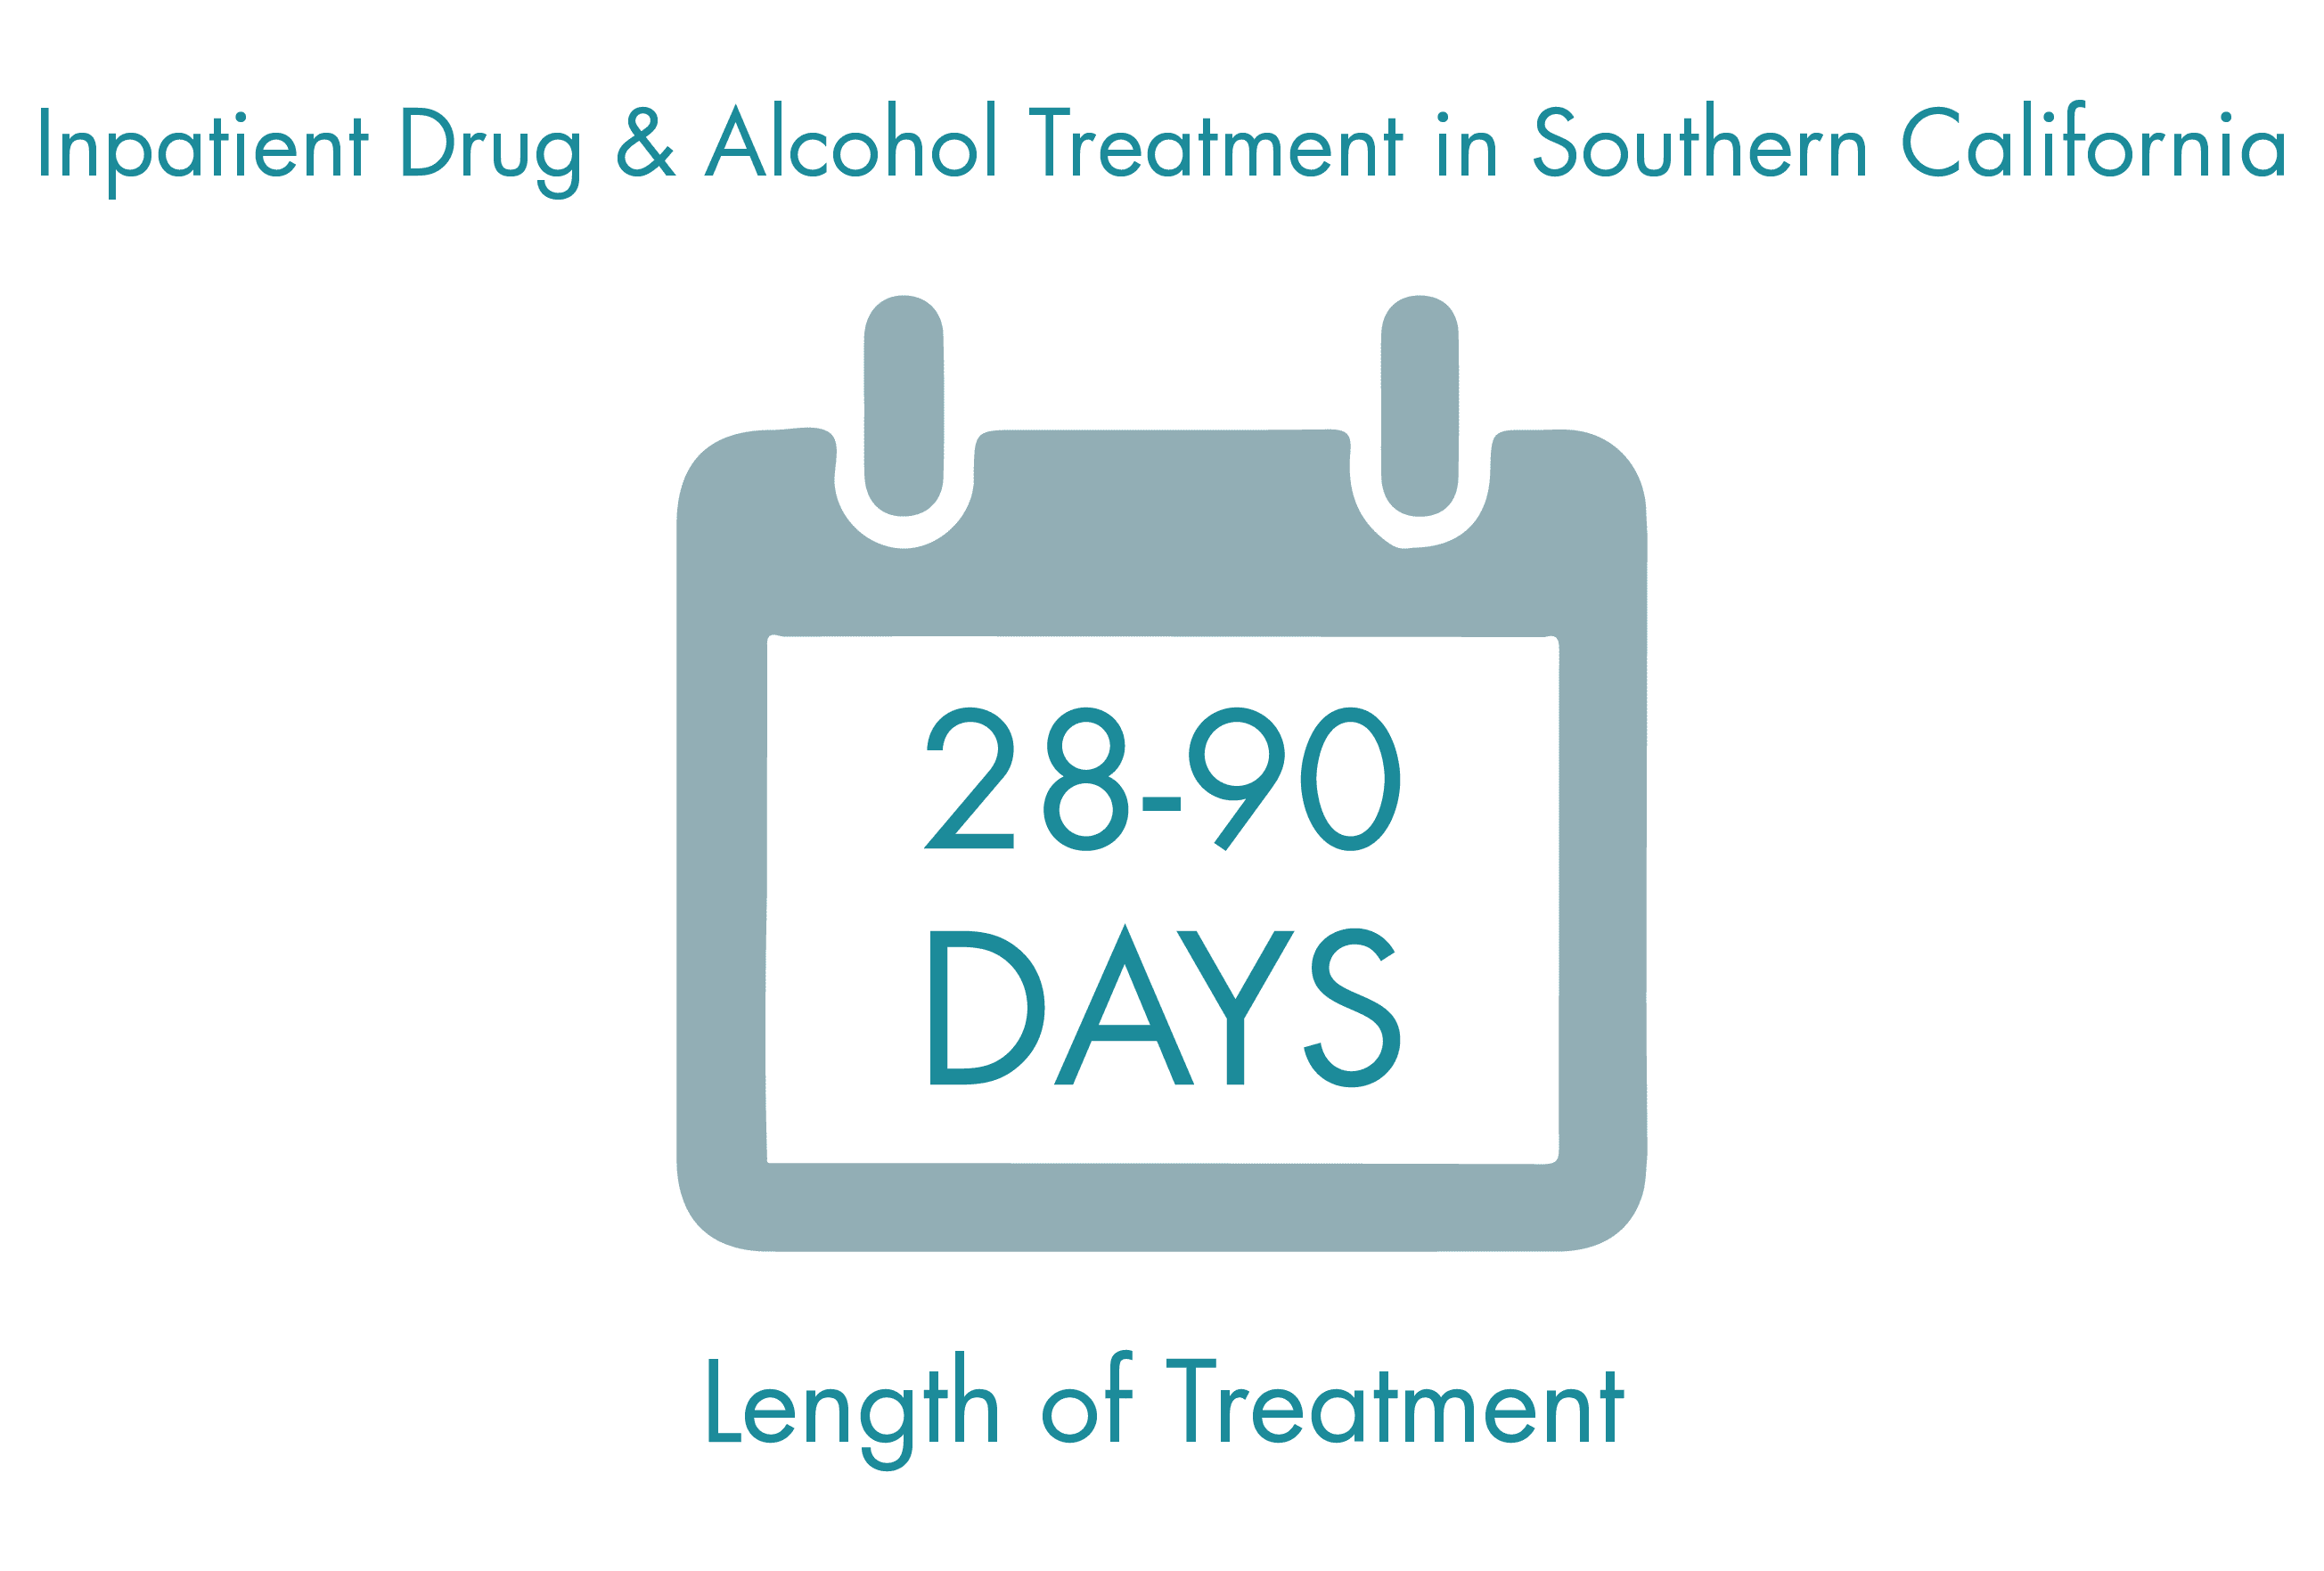 Drug & Alcohol Treatment Options in Southern California - Length of Treatment